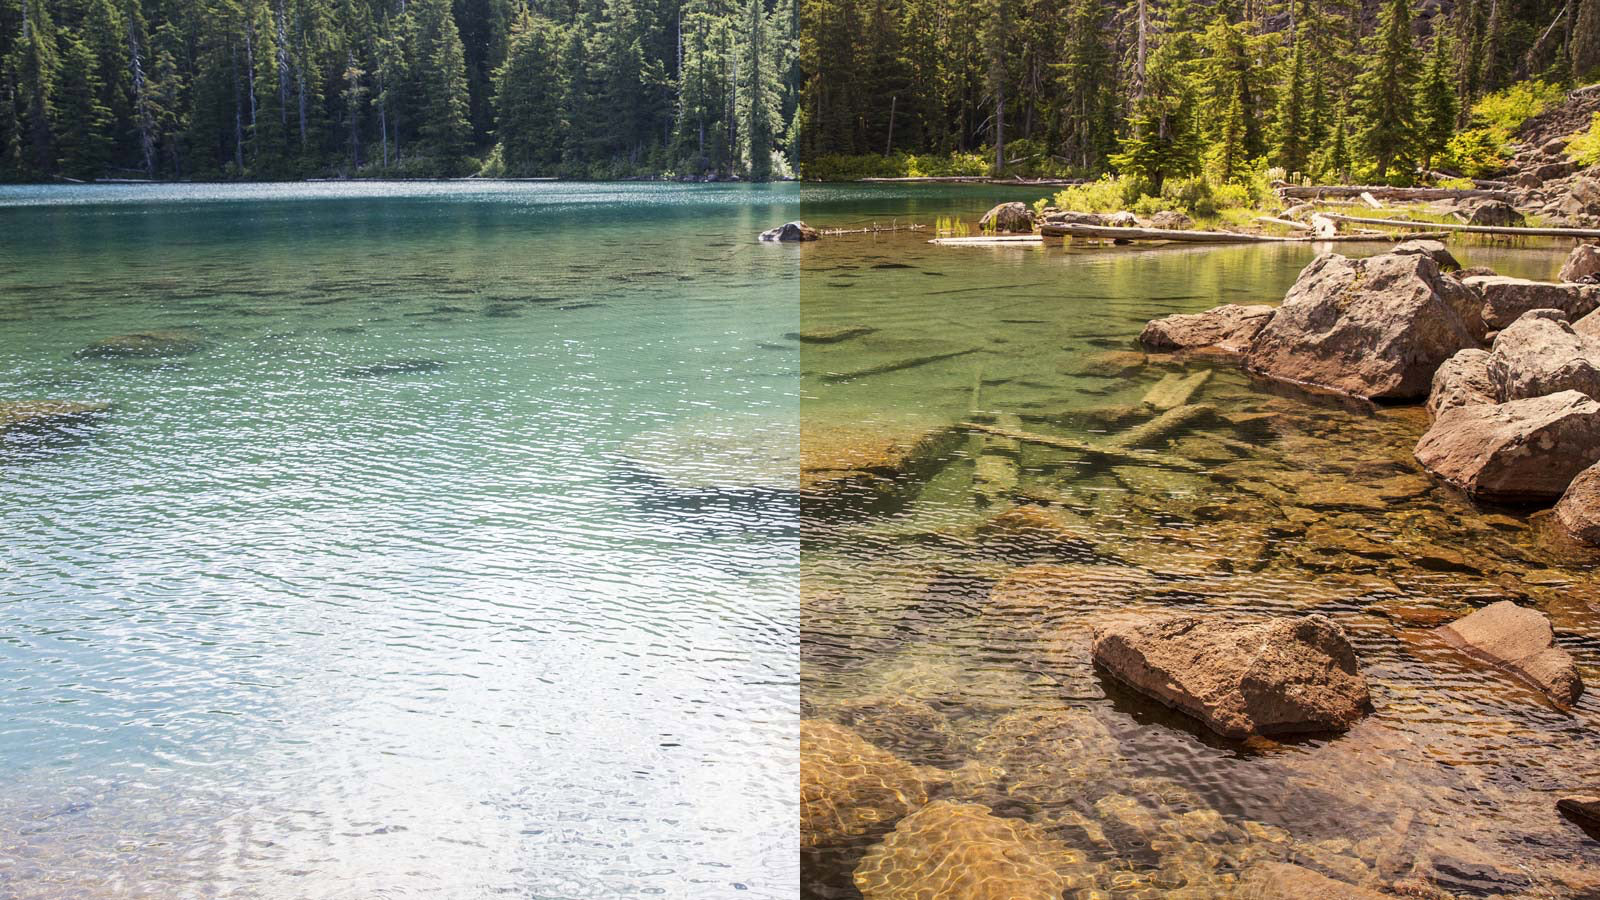 View of the water seen with and without the Flash Bronze lens